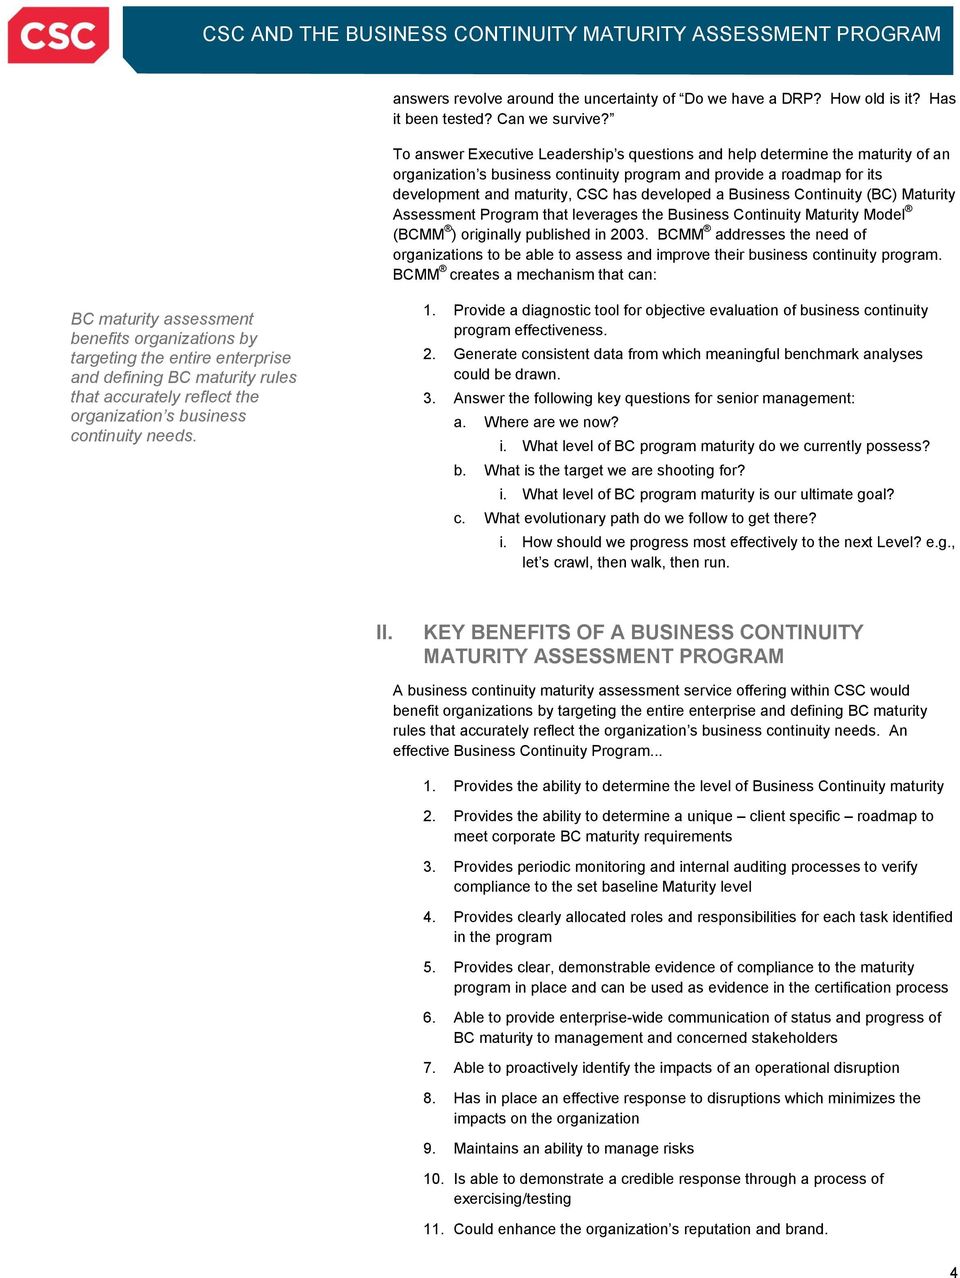 Business Continuity (BC) Maturity Assessment Program that leverages the Business Continuity Maturity Model (BCMM ) originally published in 2003.